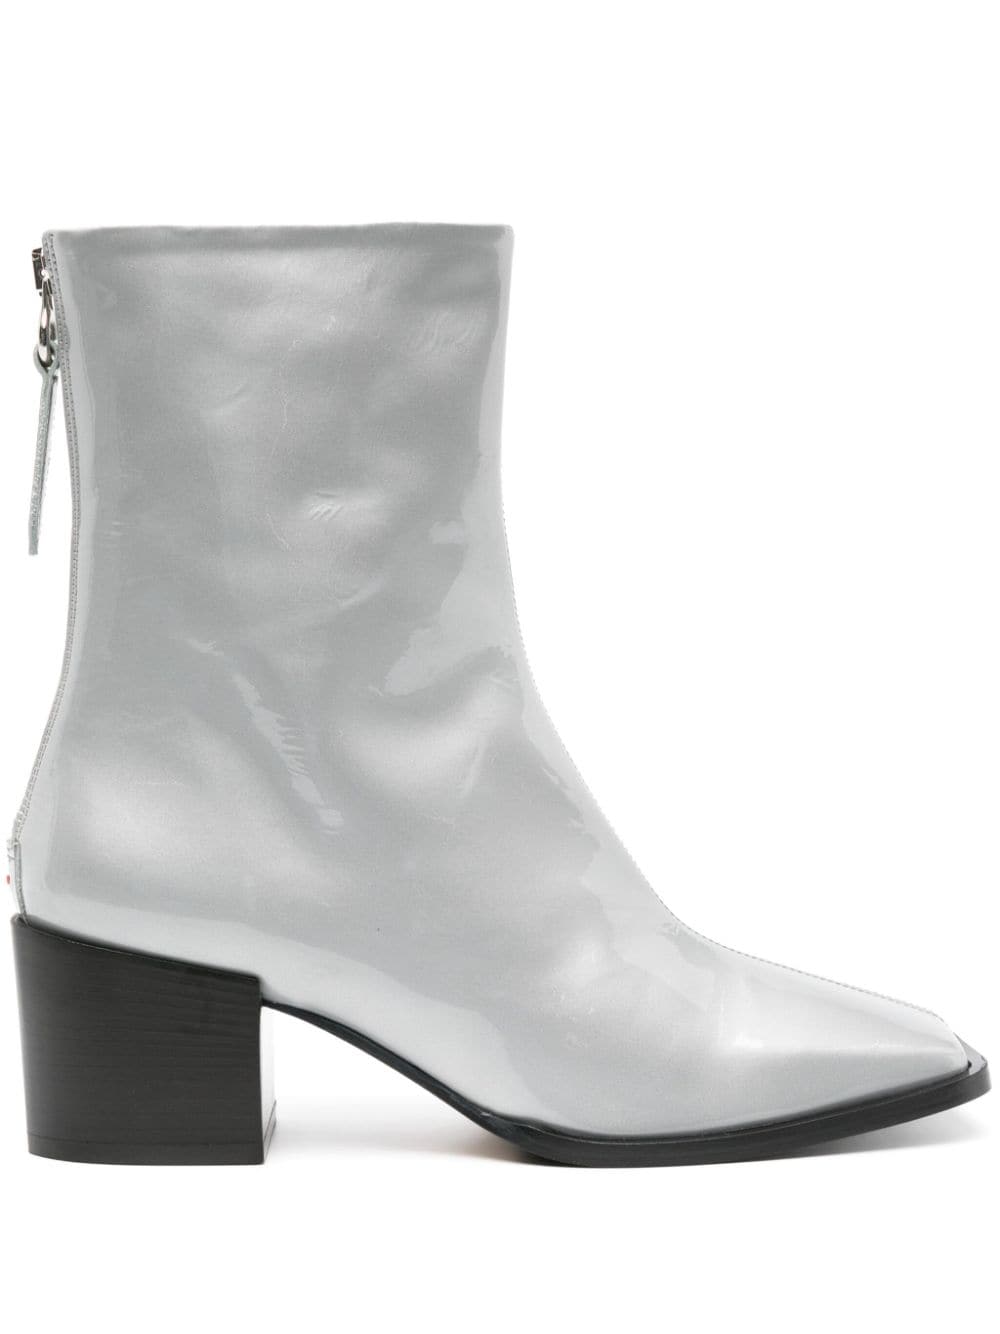 Aeyde Amina patent leather ankle boots - Grey von Aeyde